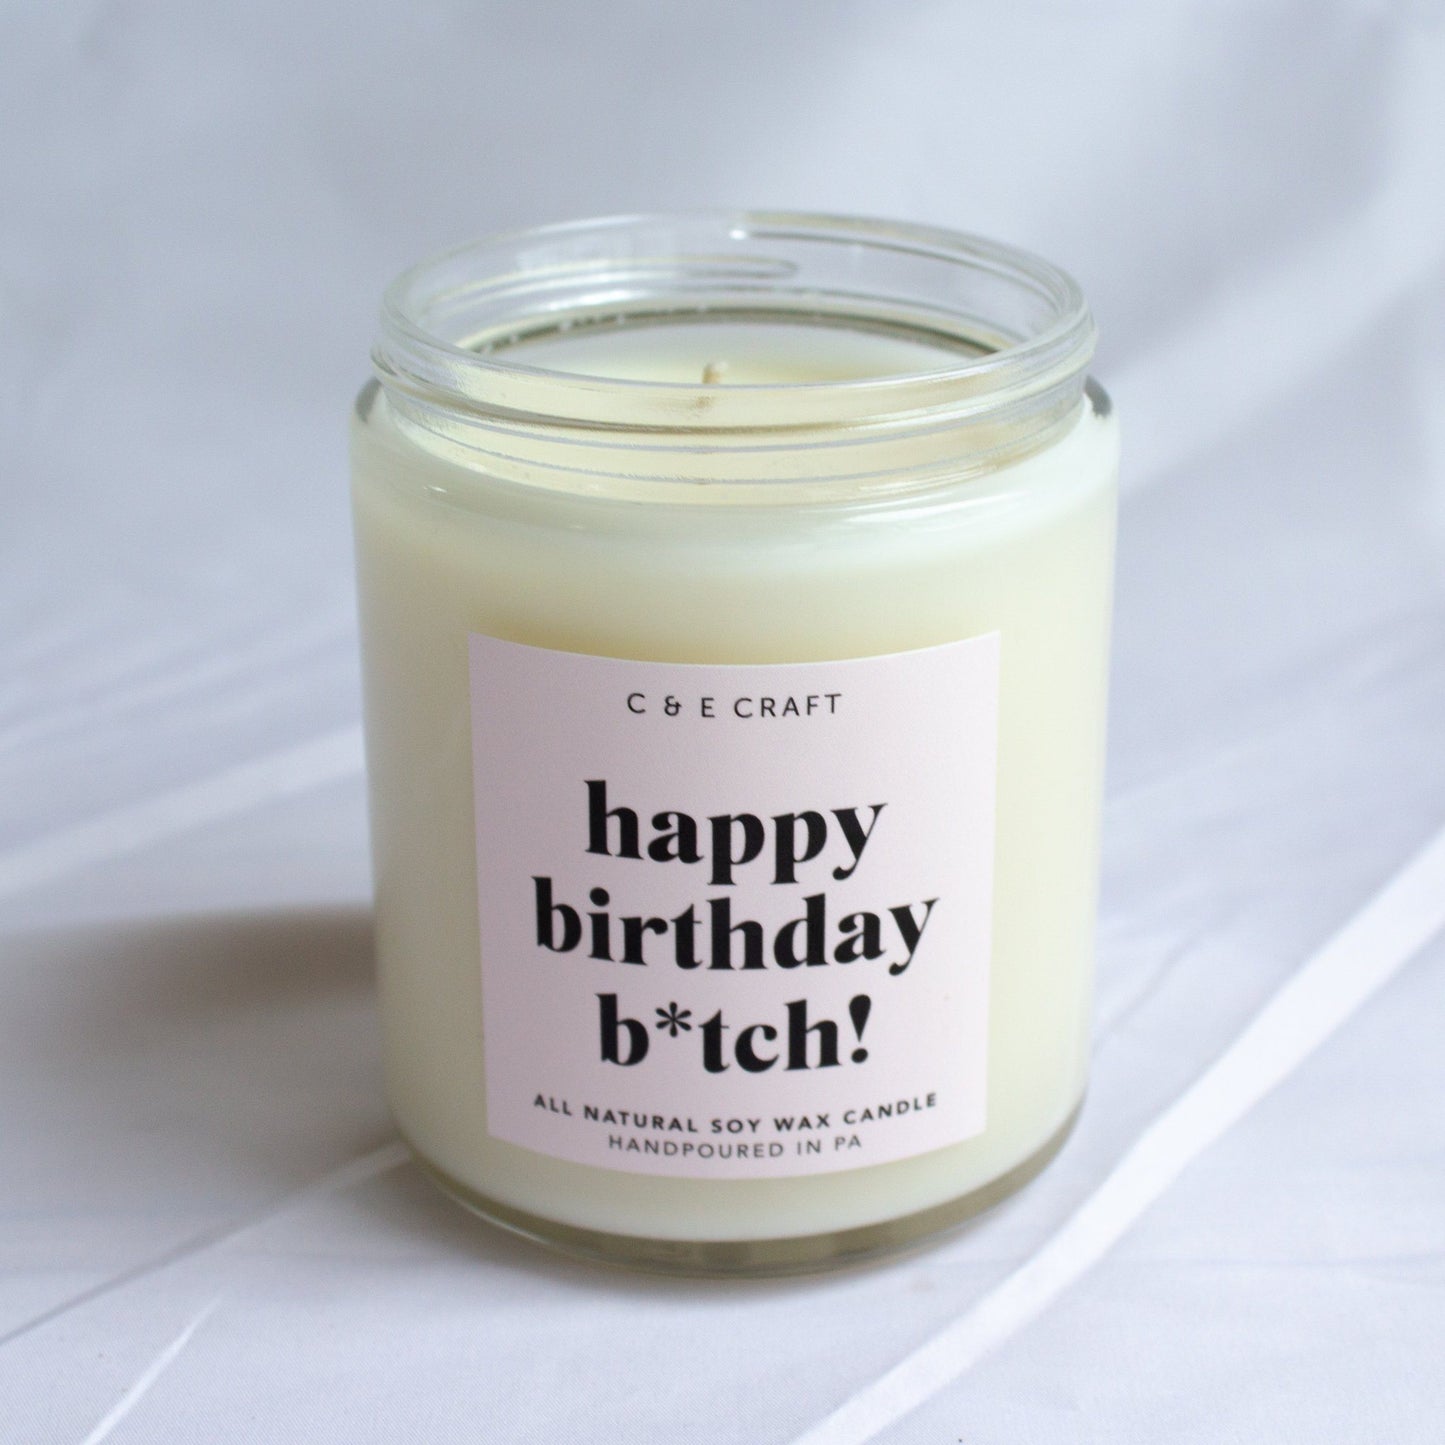 C&E - Happy Birthday B*tch - Soy Wax Candle - Birthday Gift Candle - Best Friend Gift C & E Craft Co 